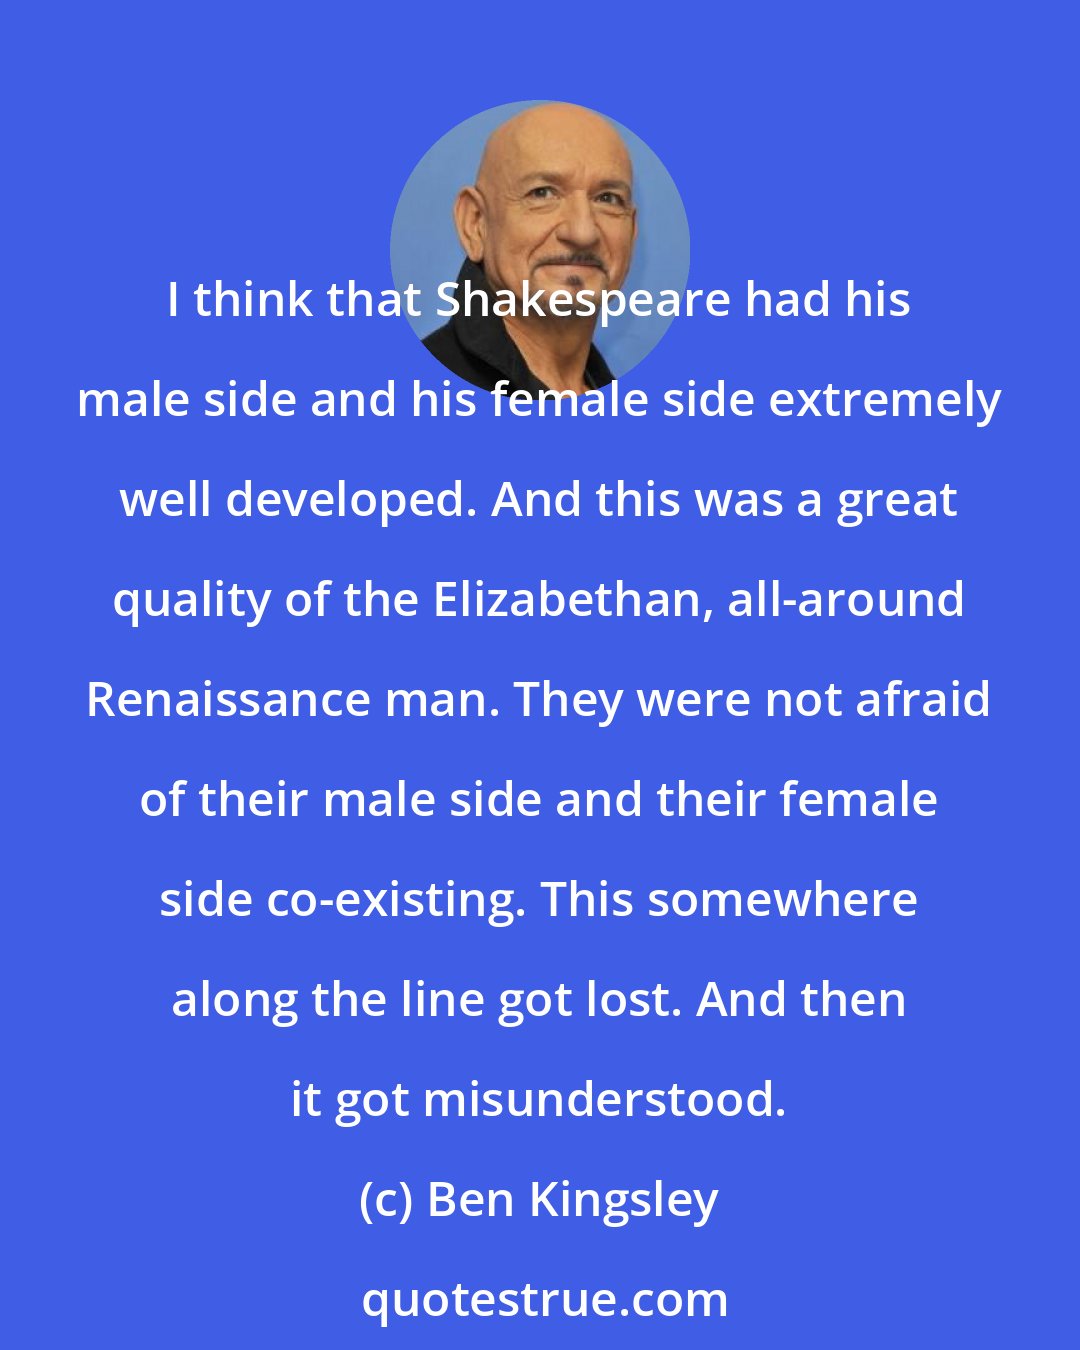 Ben Kingsley: I think that Shakespeare had his male side and his female side extremely well developed. And this was a great quality of the Elizabethan, all-around Renaissance man. They were not afraid of their male side and their female side co-existing. This somewhere along the line got lost. And then it got misunderstood.